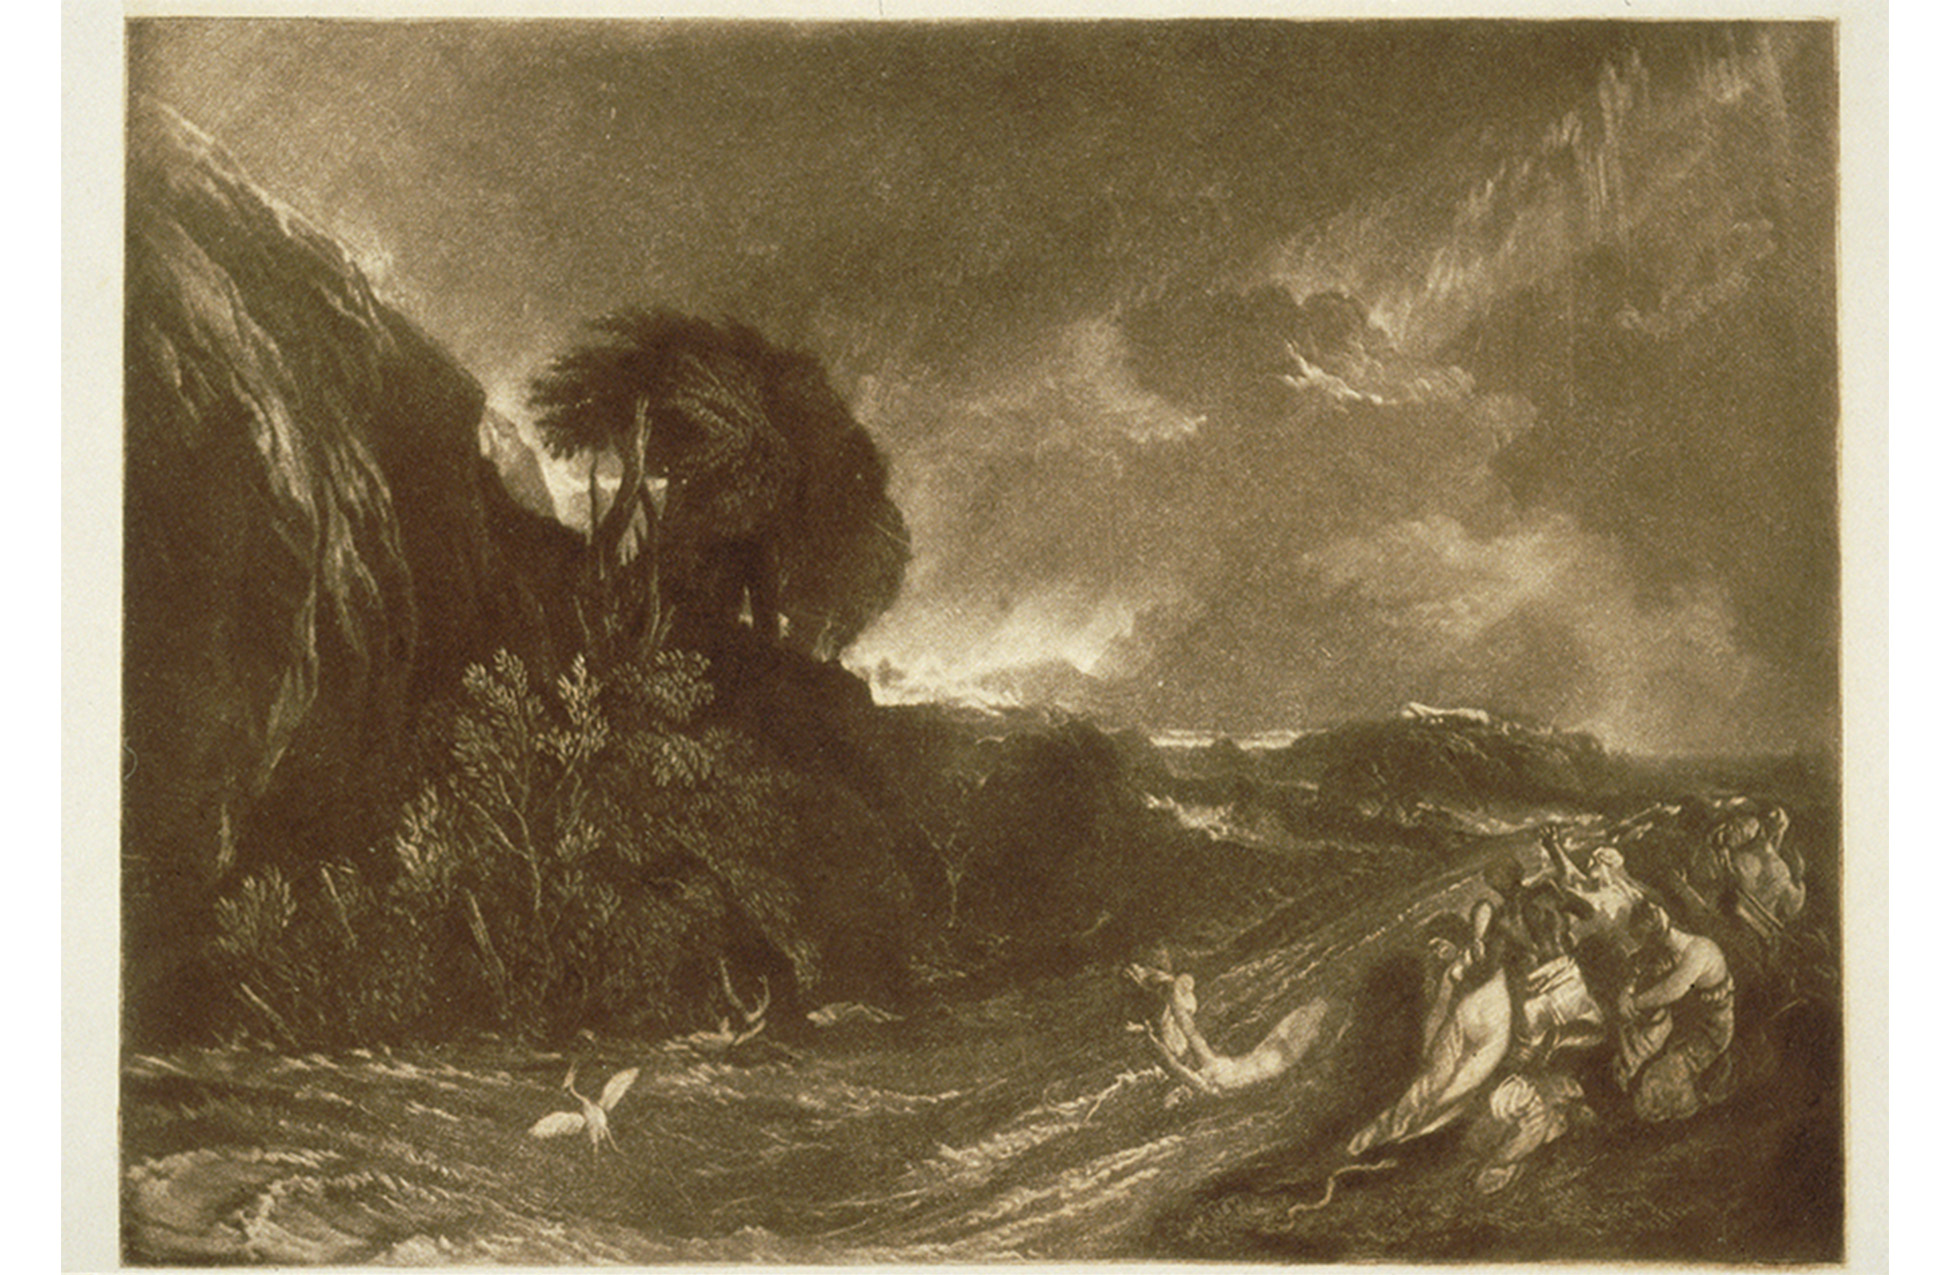 mountainside with trees. large wave in the midst of a storm. people standing in the bottom right corner.